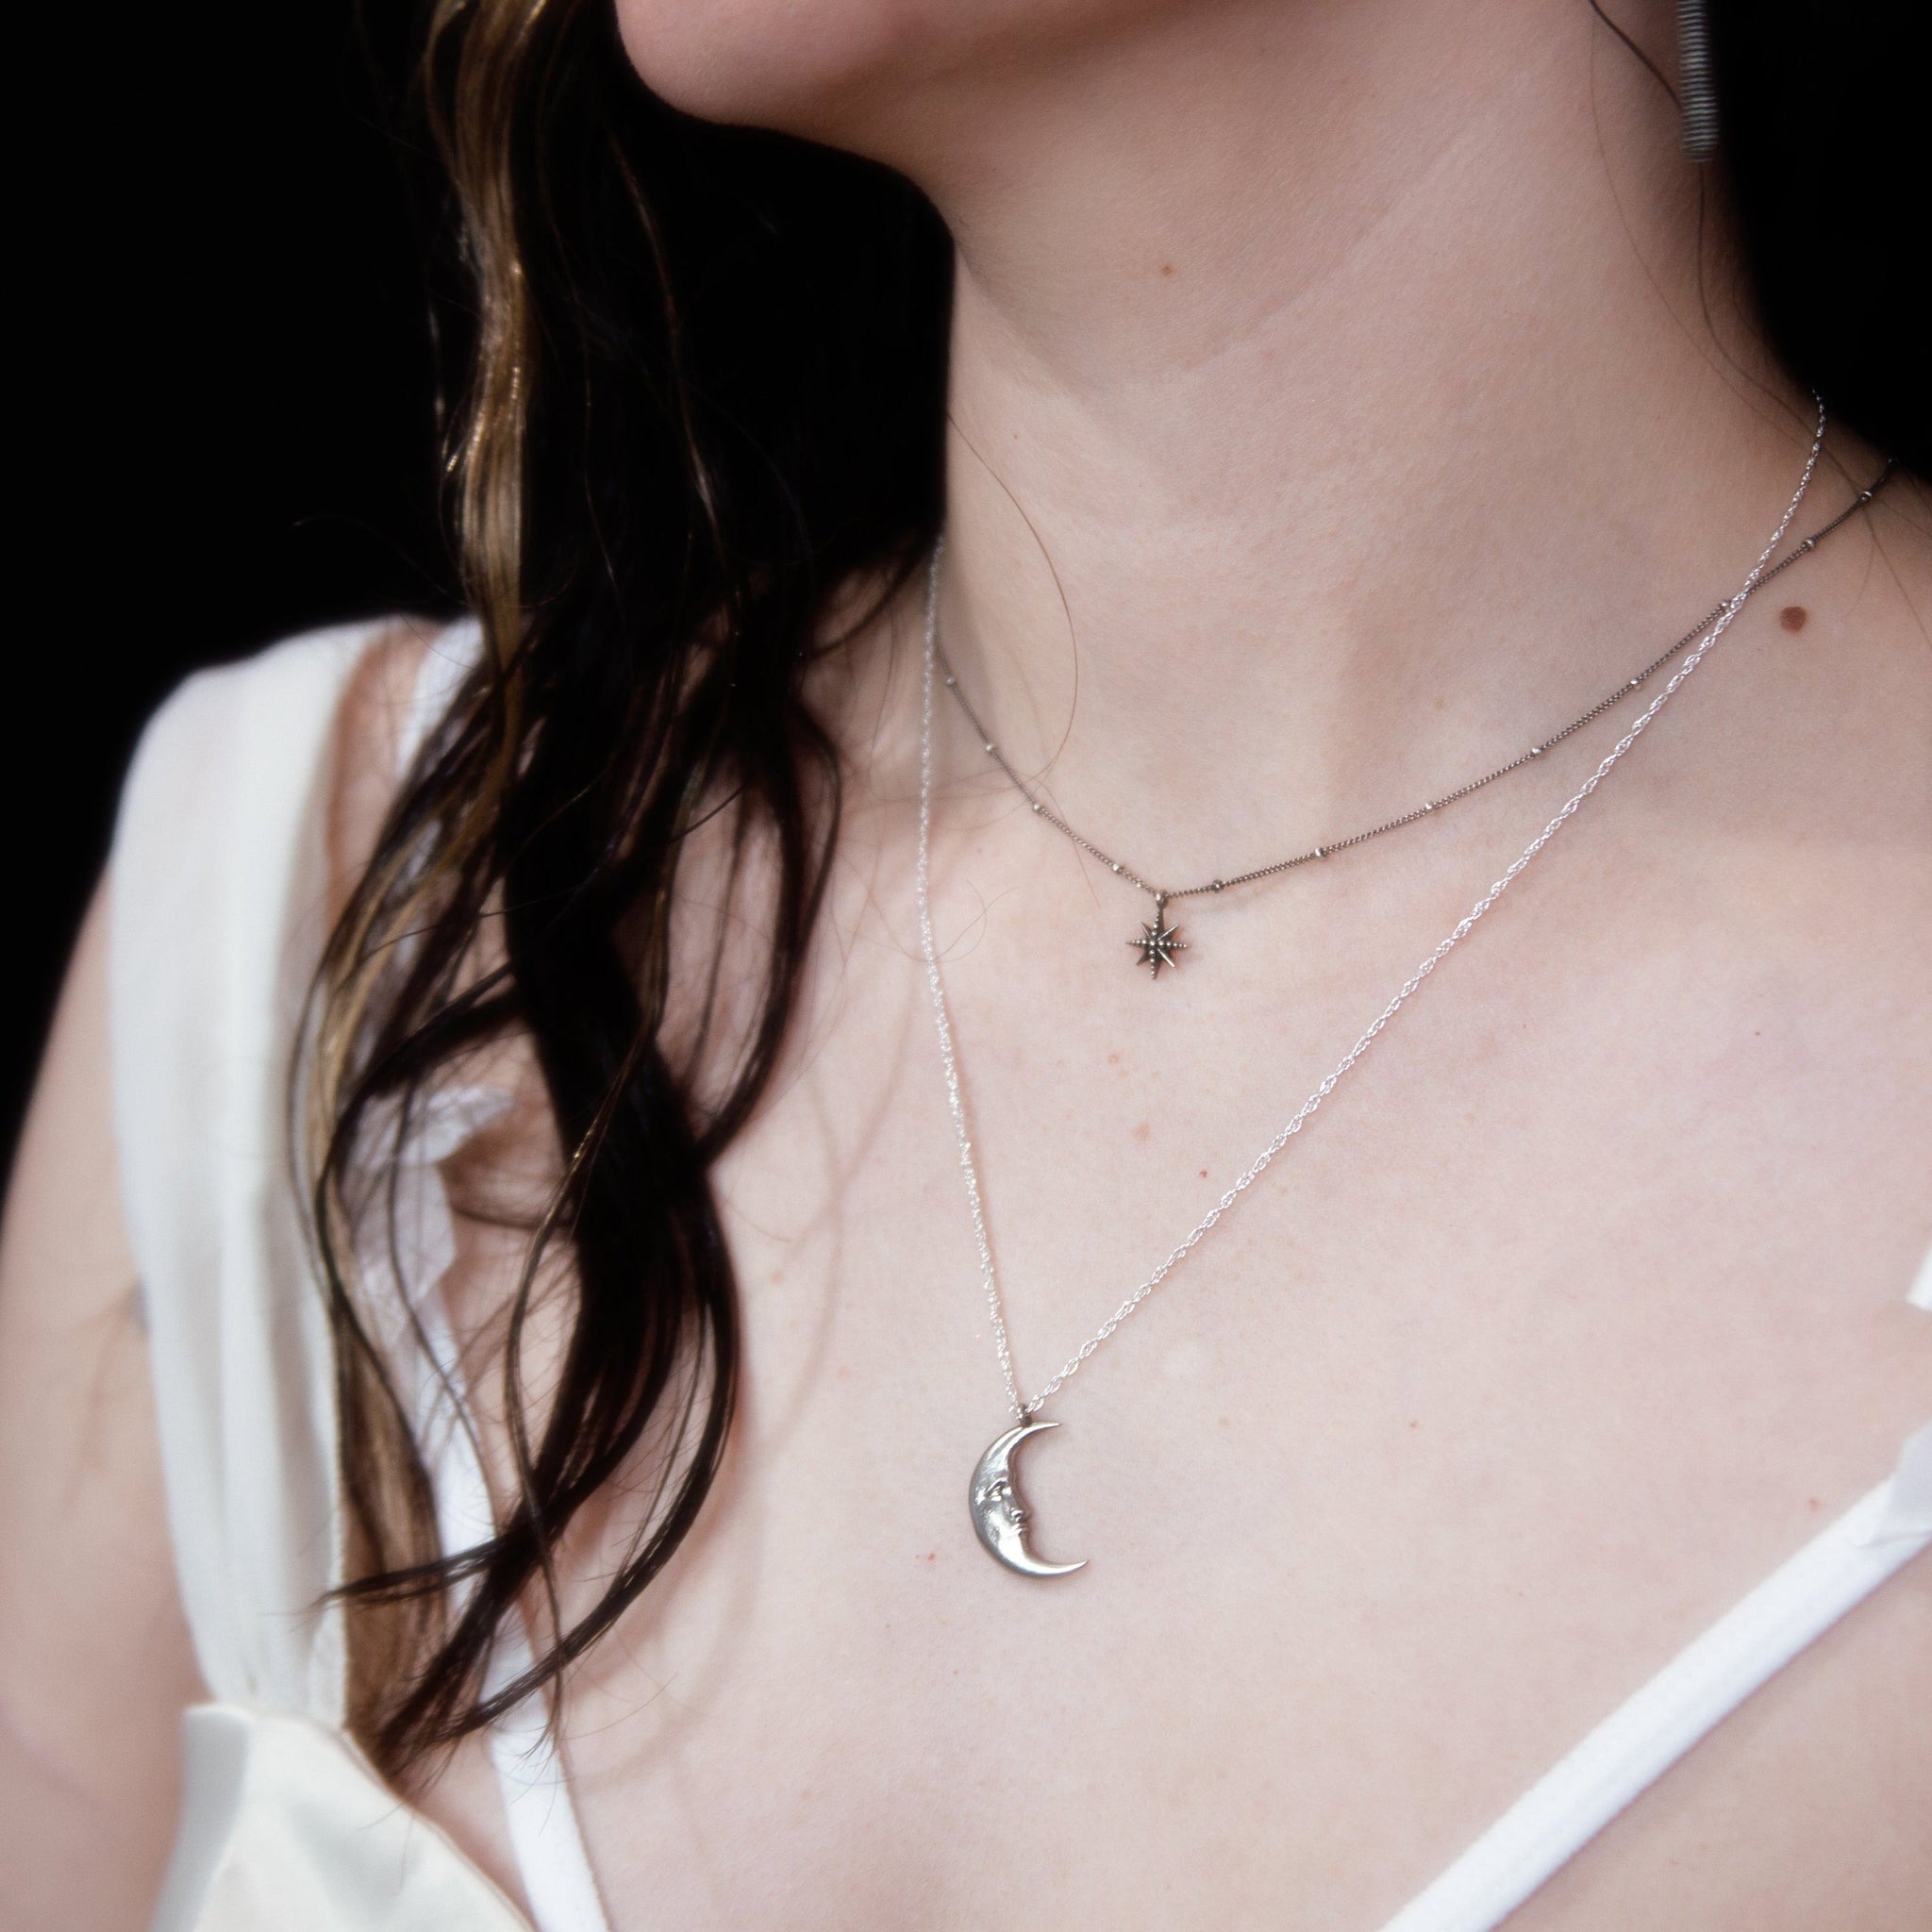 Astraea Necklace and Nocturne Necklace in sterling silver